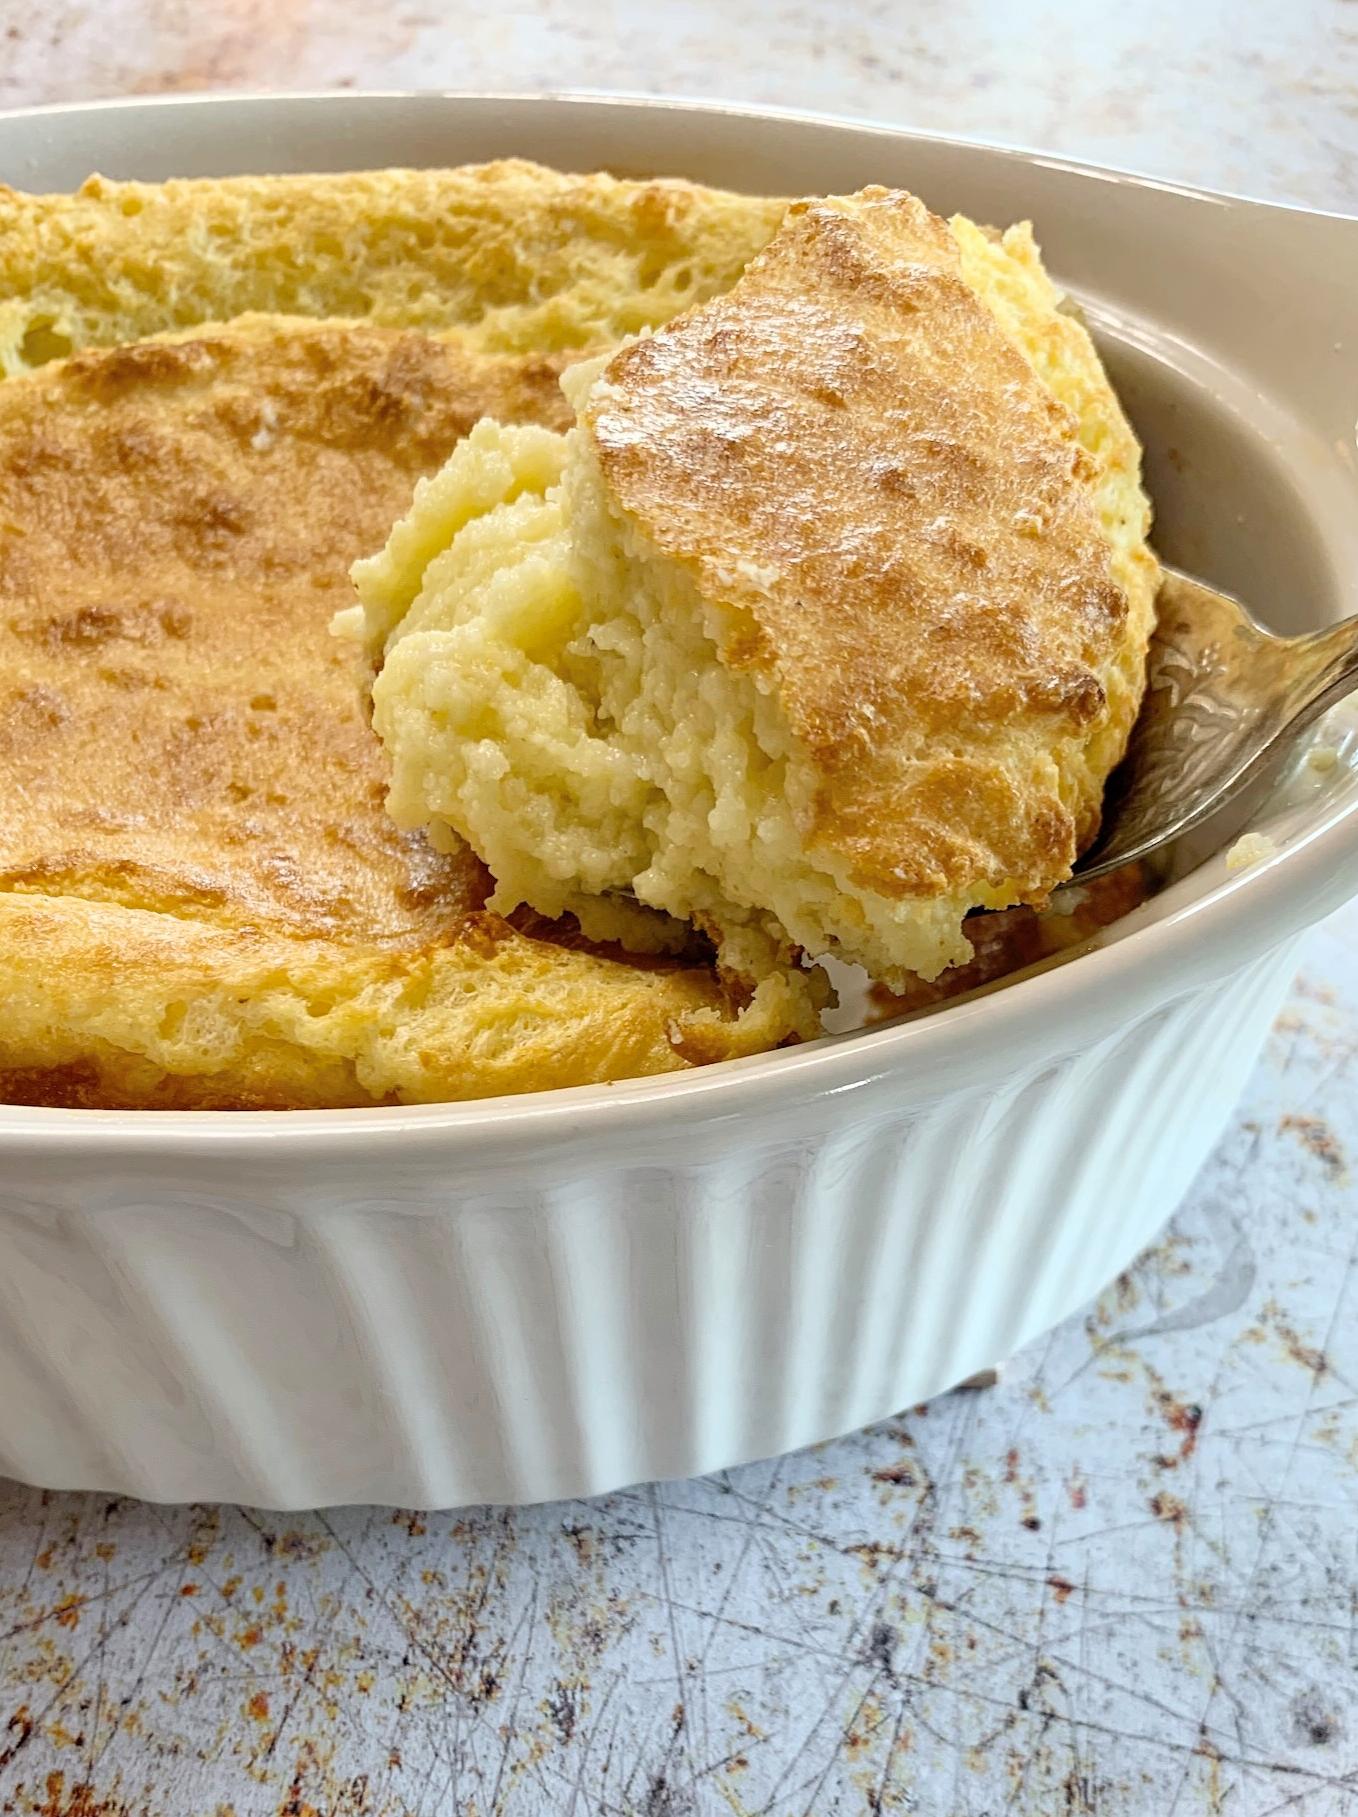  A golden, crispy crust and a soft, fluffy interior make this Spoon Bread a must-try!